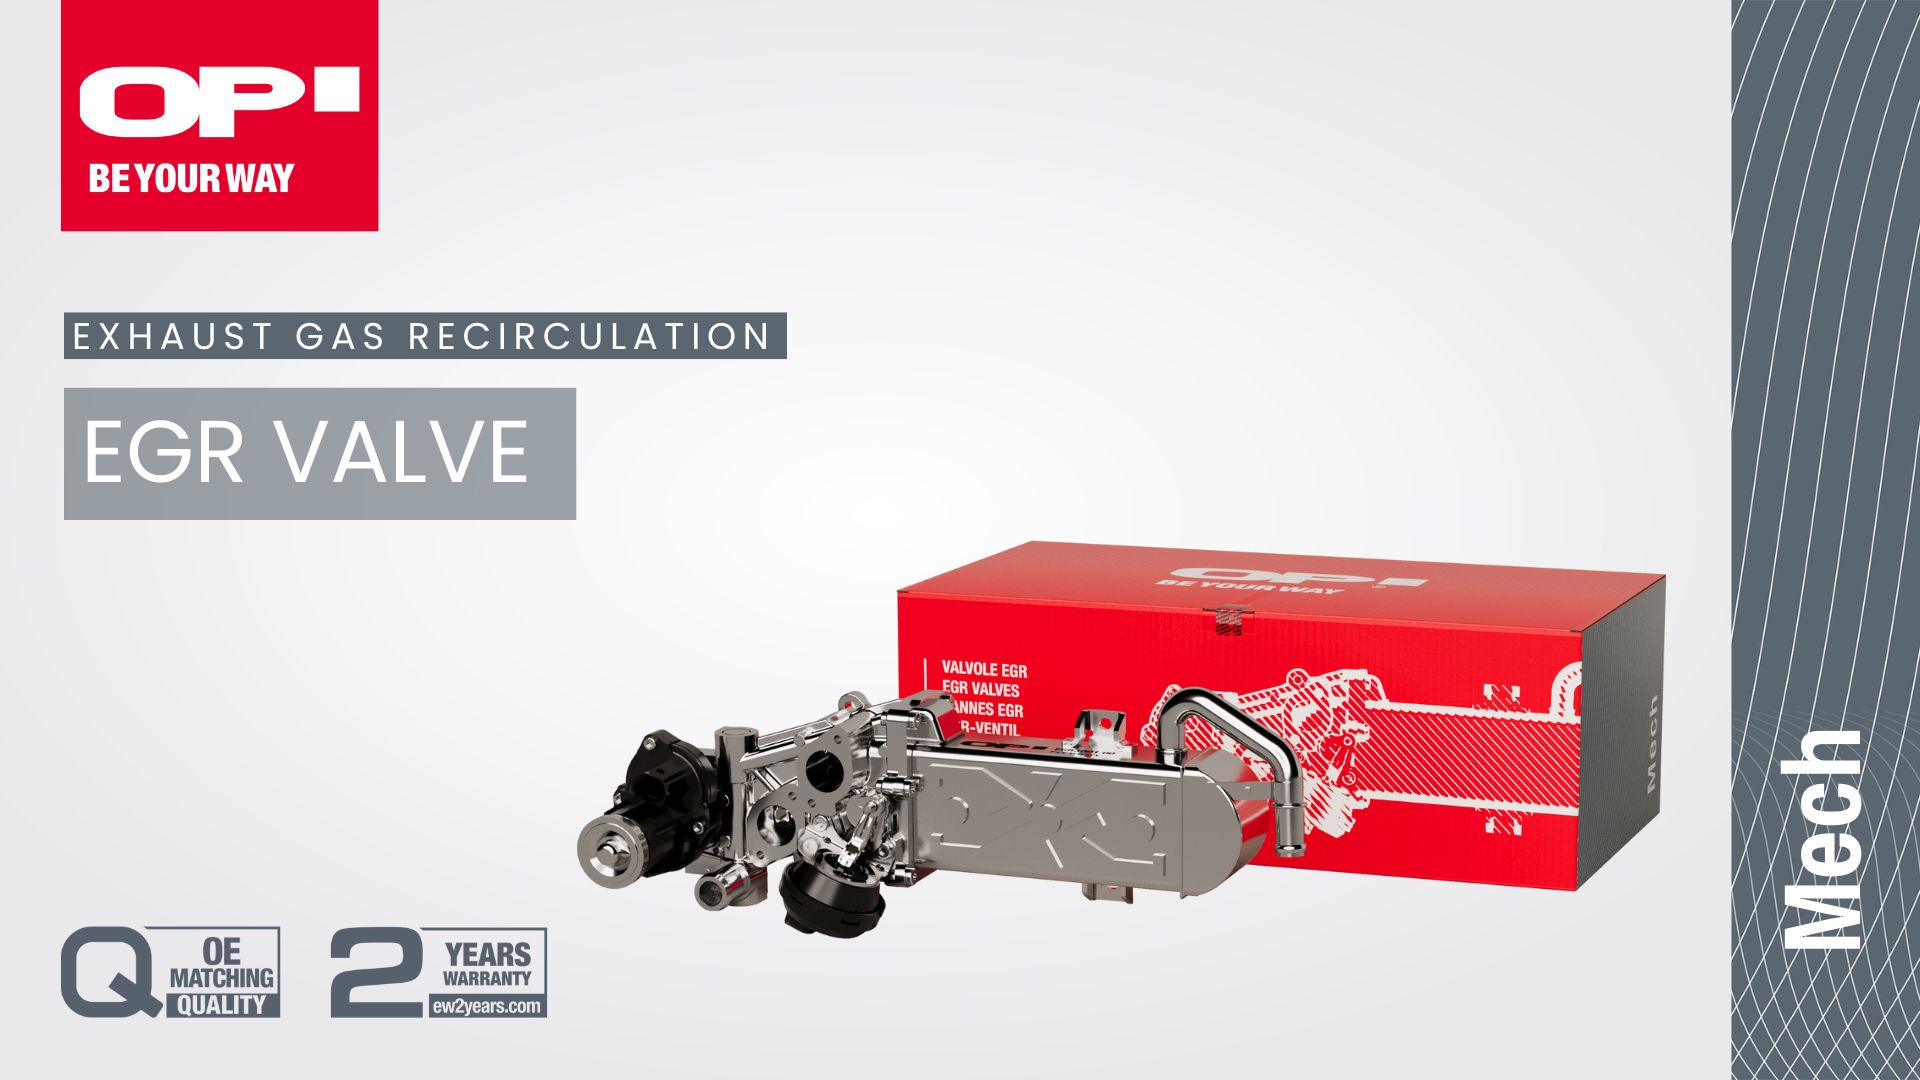 OP introduces the new product line "Exhaust Gas Recirculation System" featuring a range of EGR Valves 